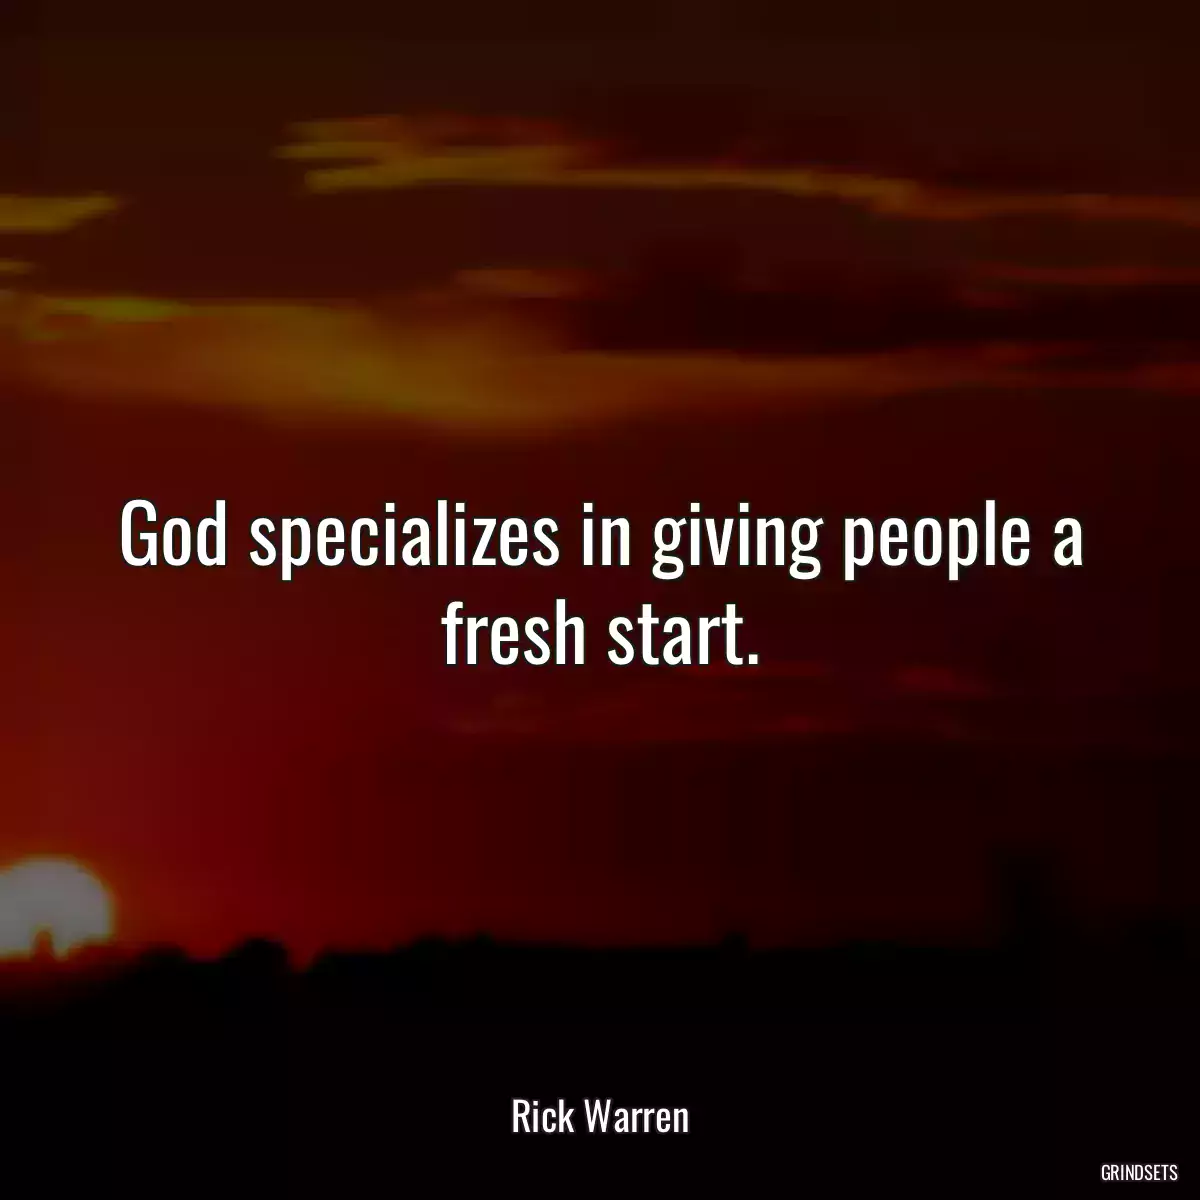 God specializes in giving people a fresh start.